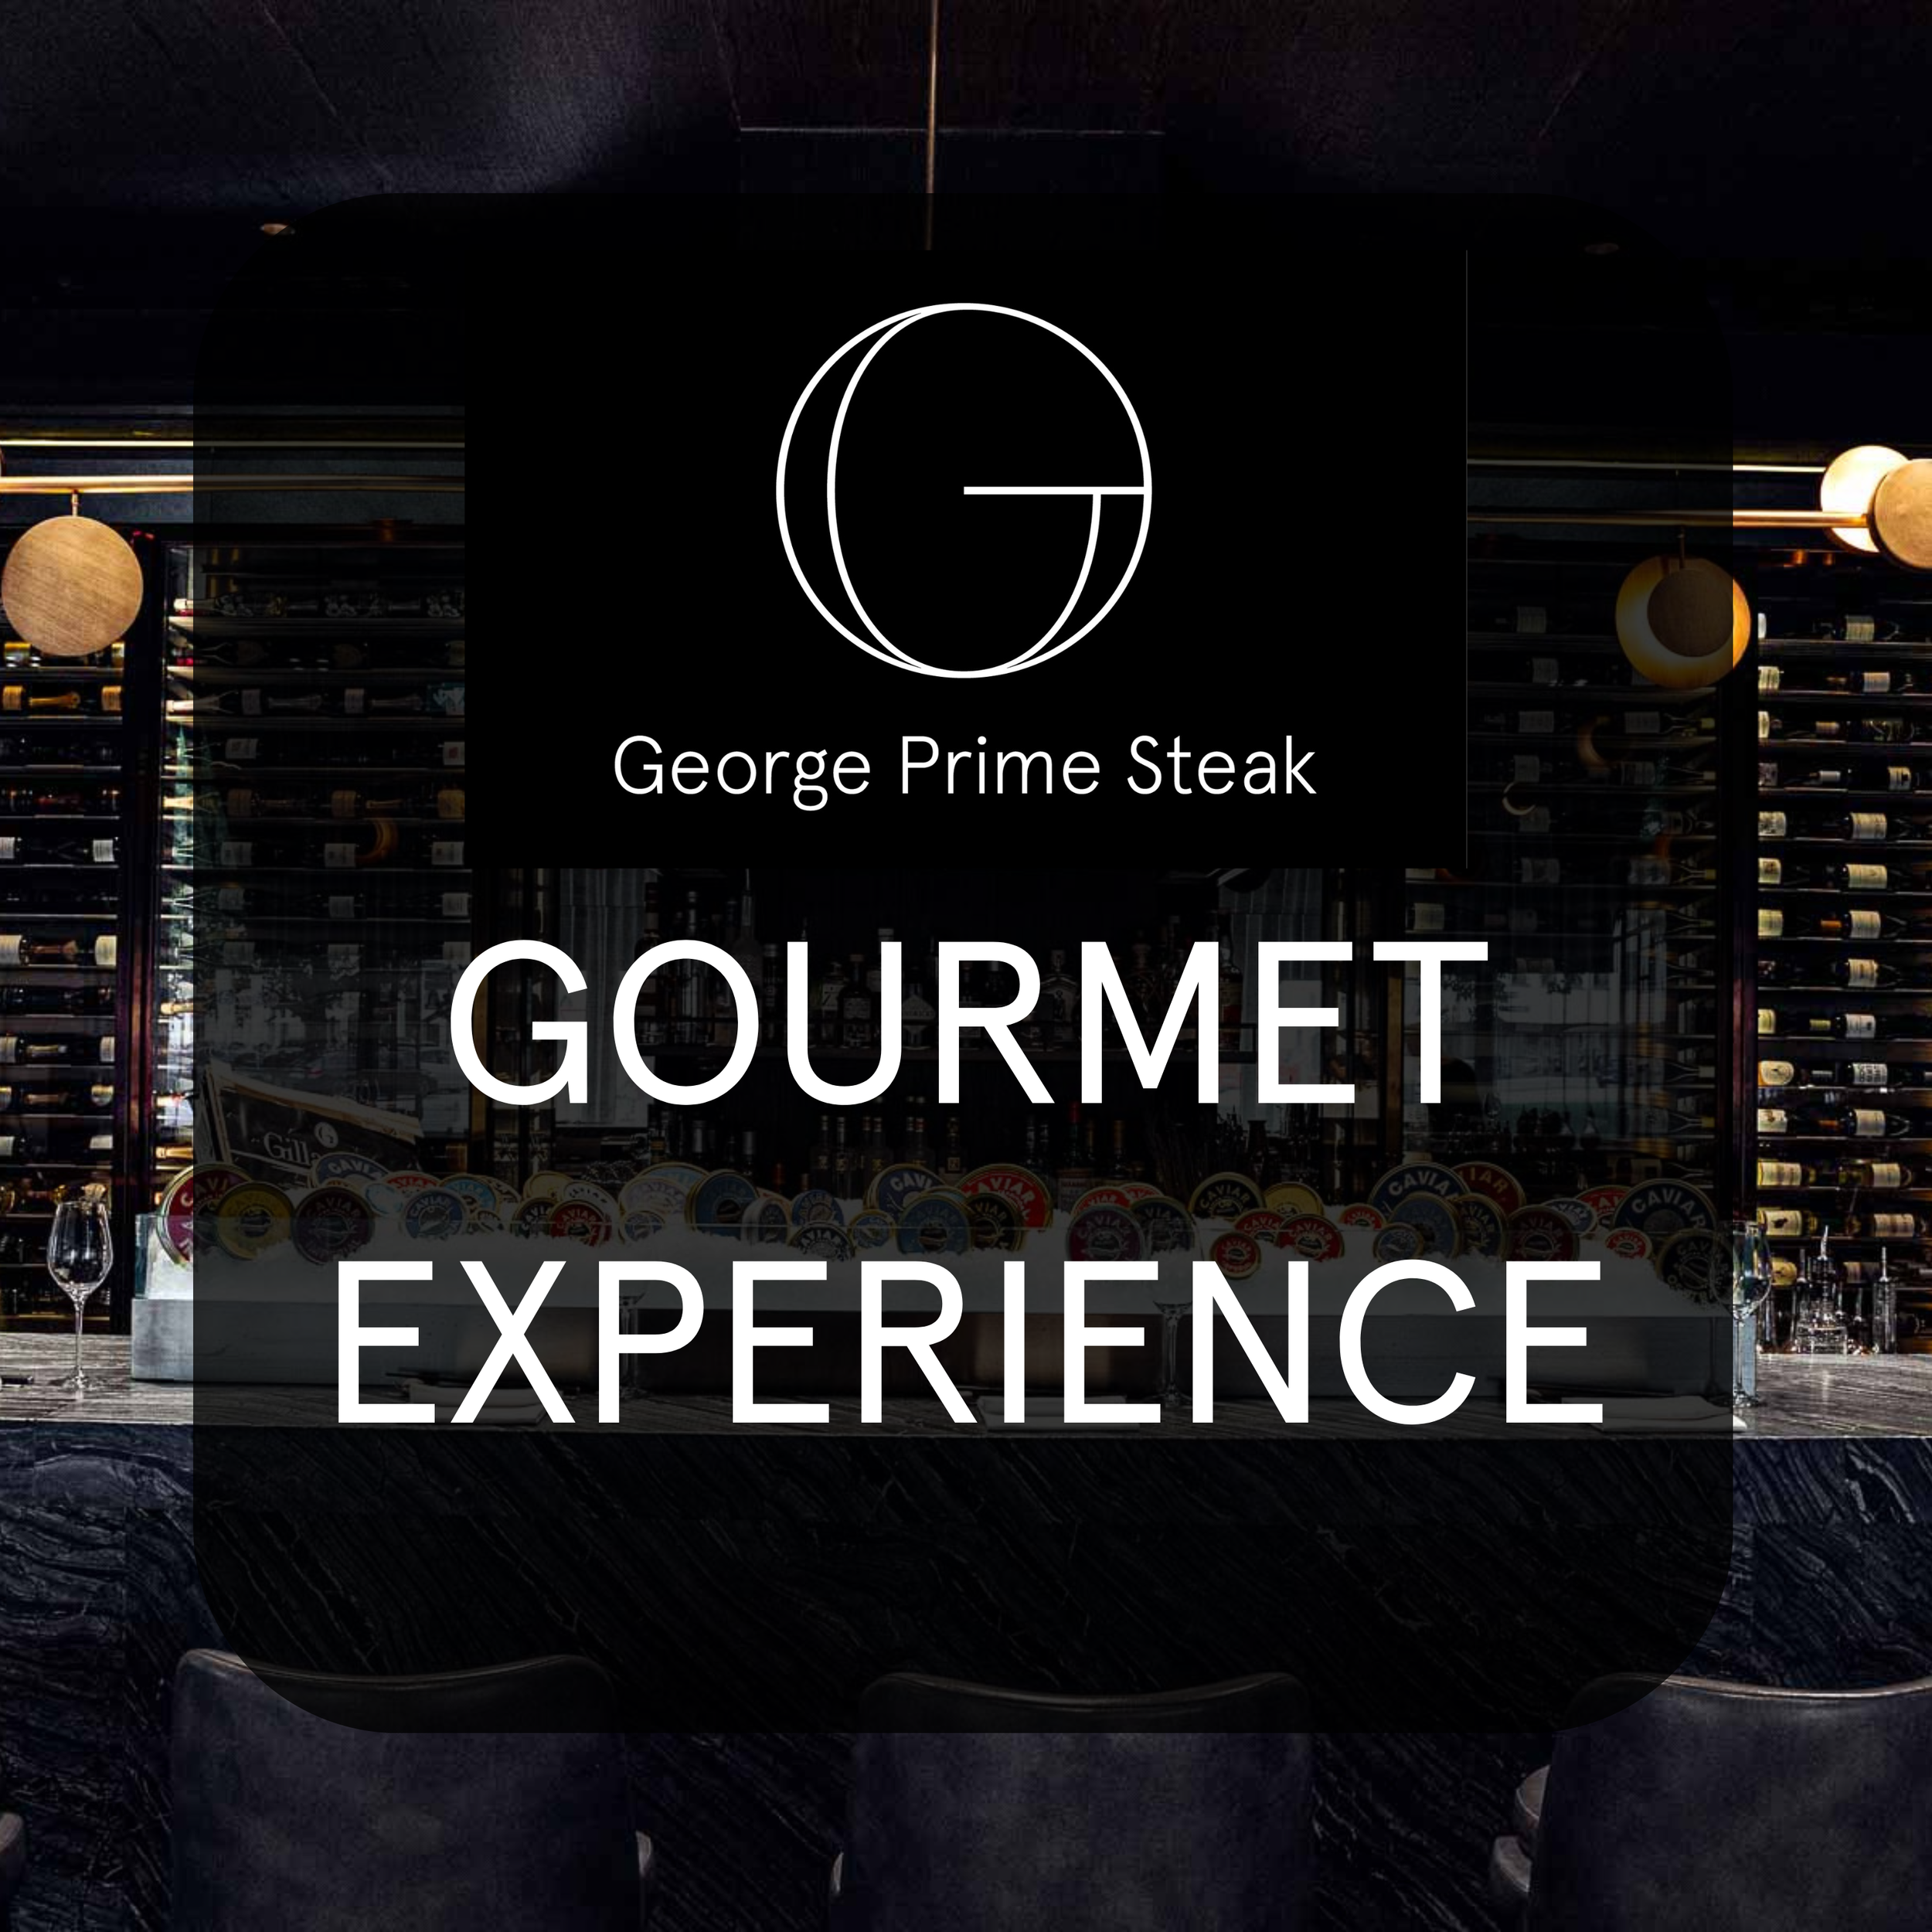 Gourmet Experience: A Taste of Luxury at GPS Munich